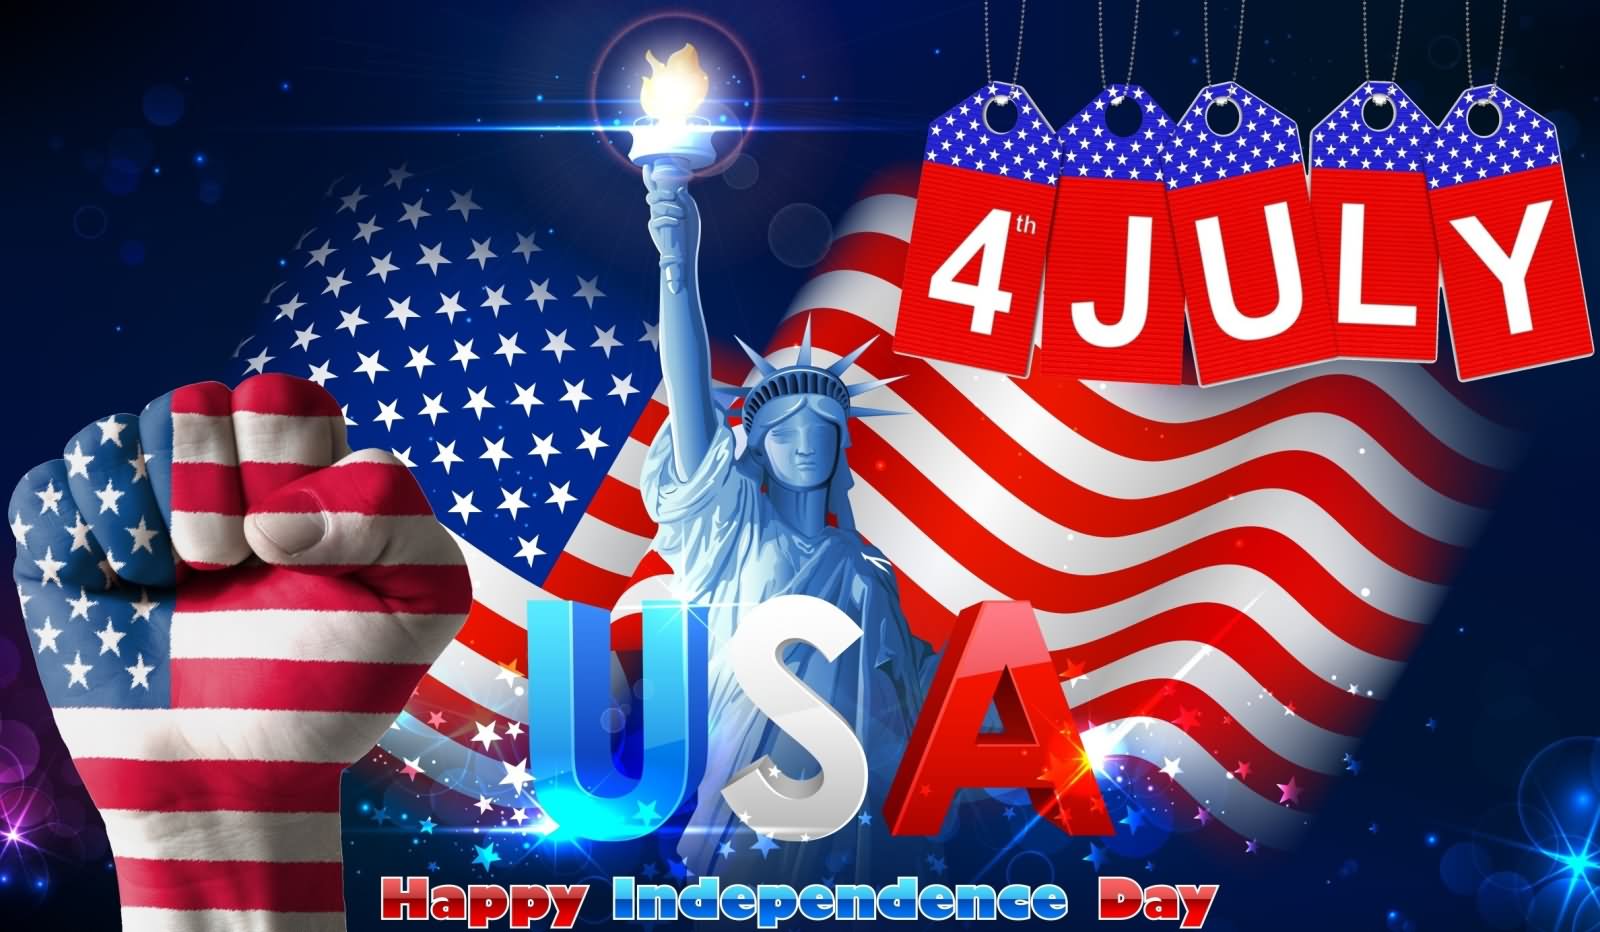 Unites States 4th July Independence Day Greeting For Facebook Cover Wallpaper